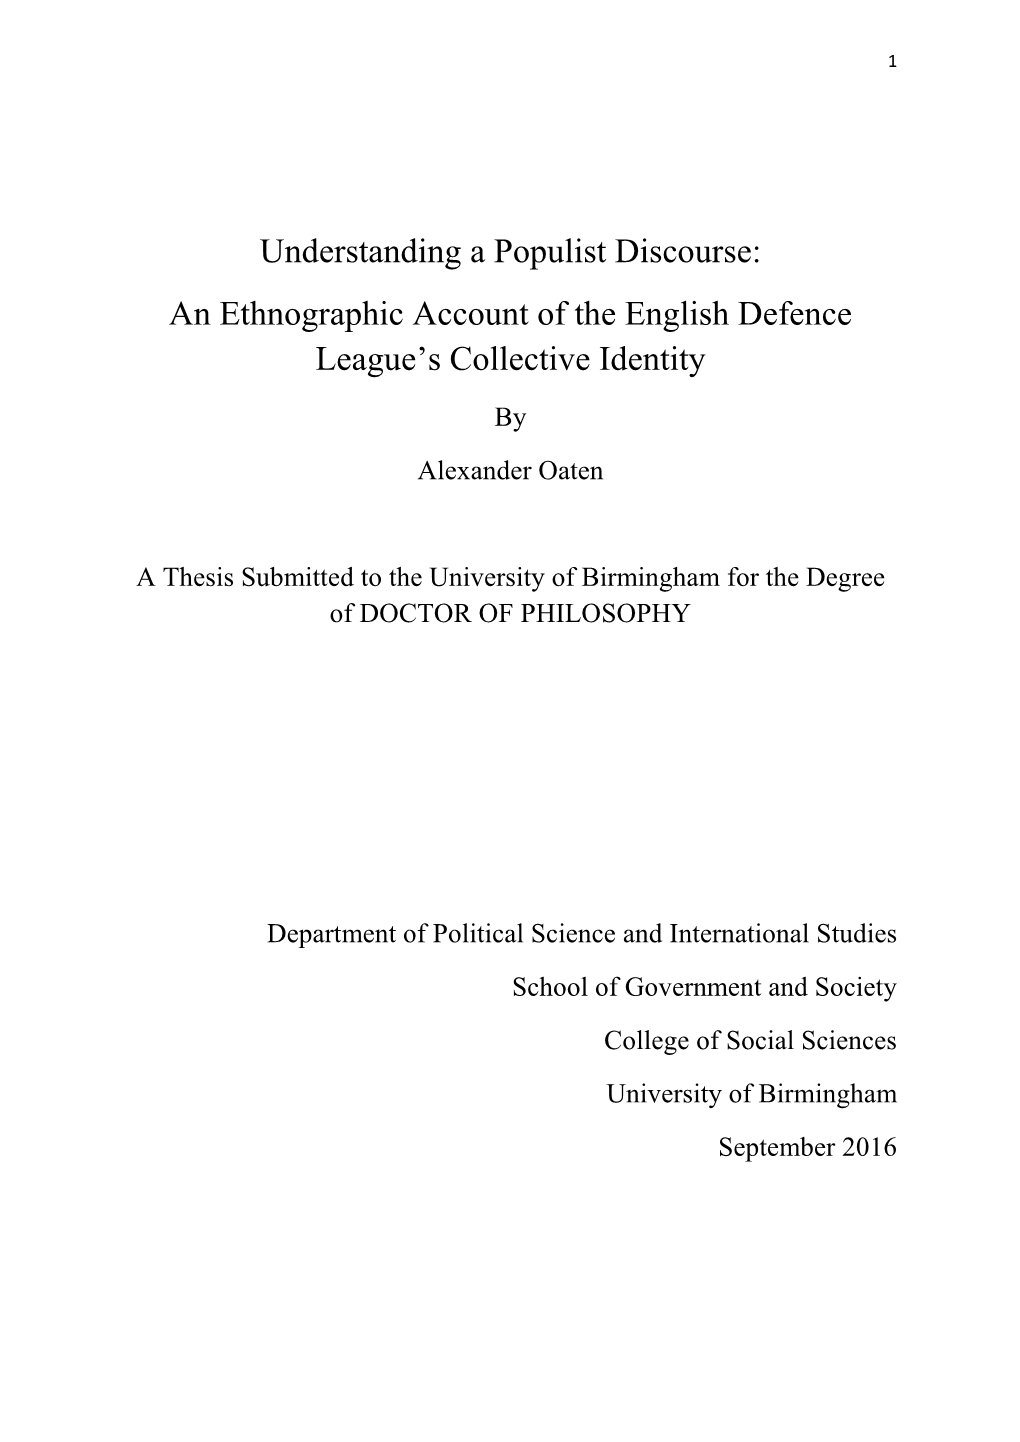 Understanding a Populist Discourse: an Ethnographic Account of the English Defence League’S Collective Identity by Alexander Oaten